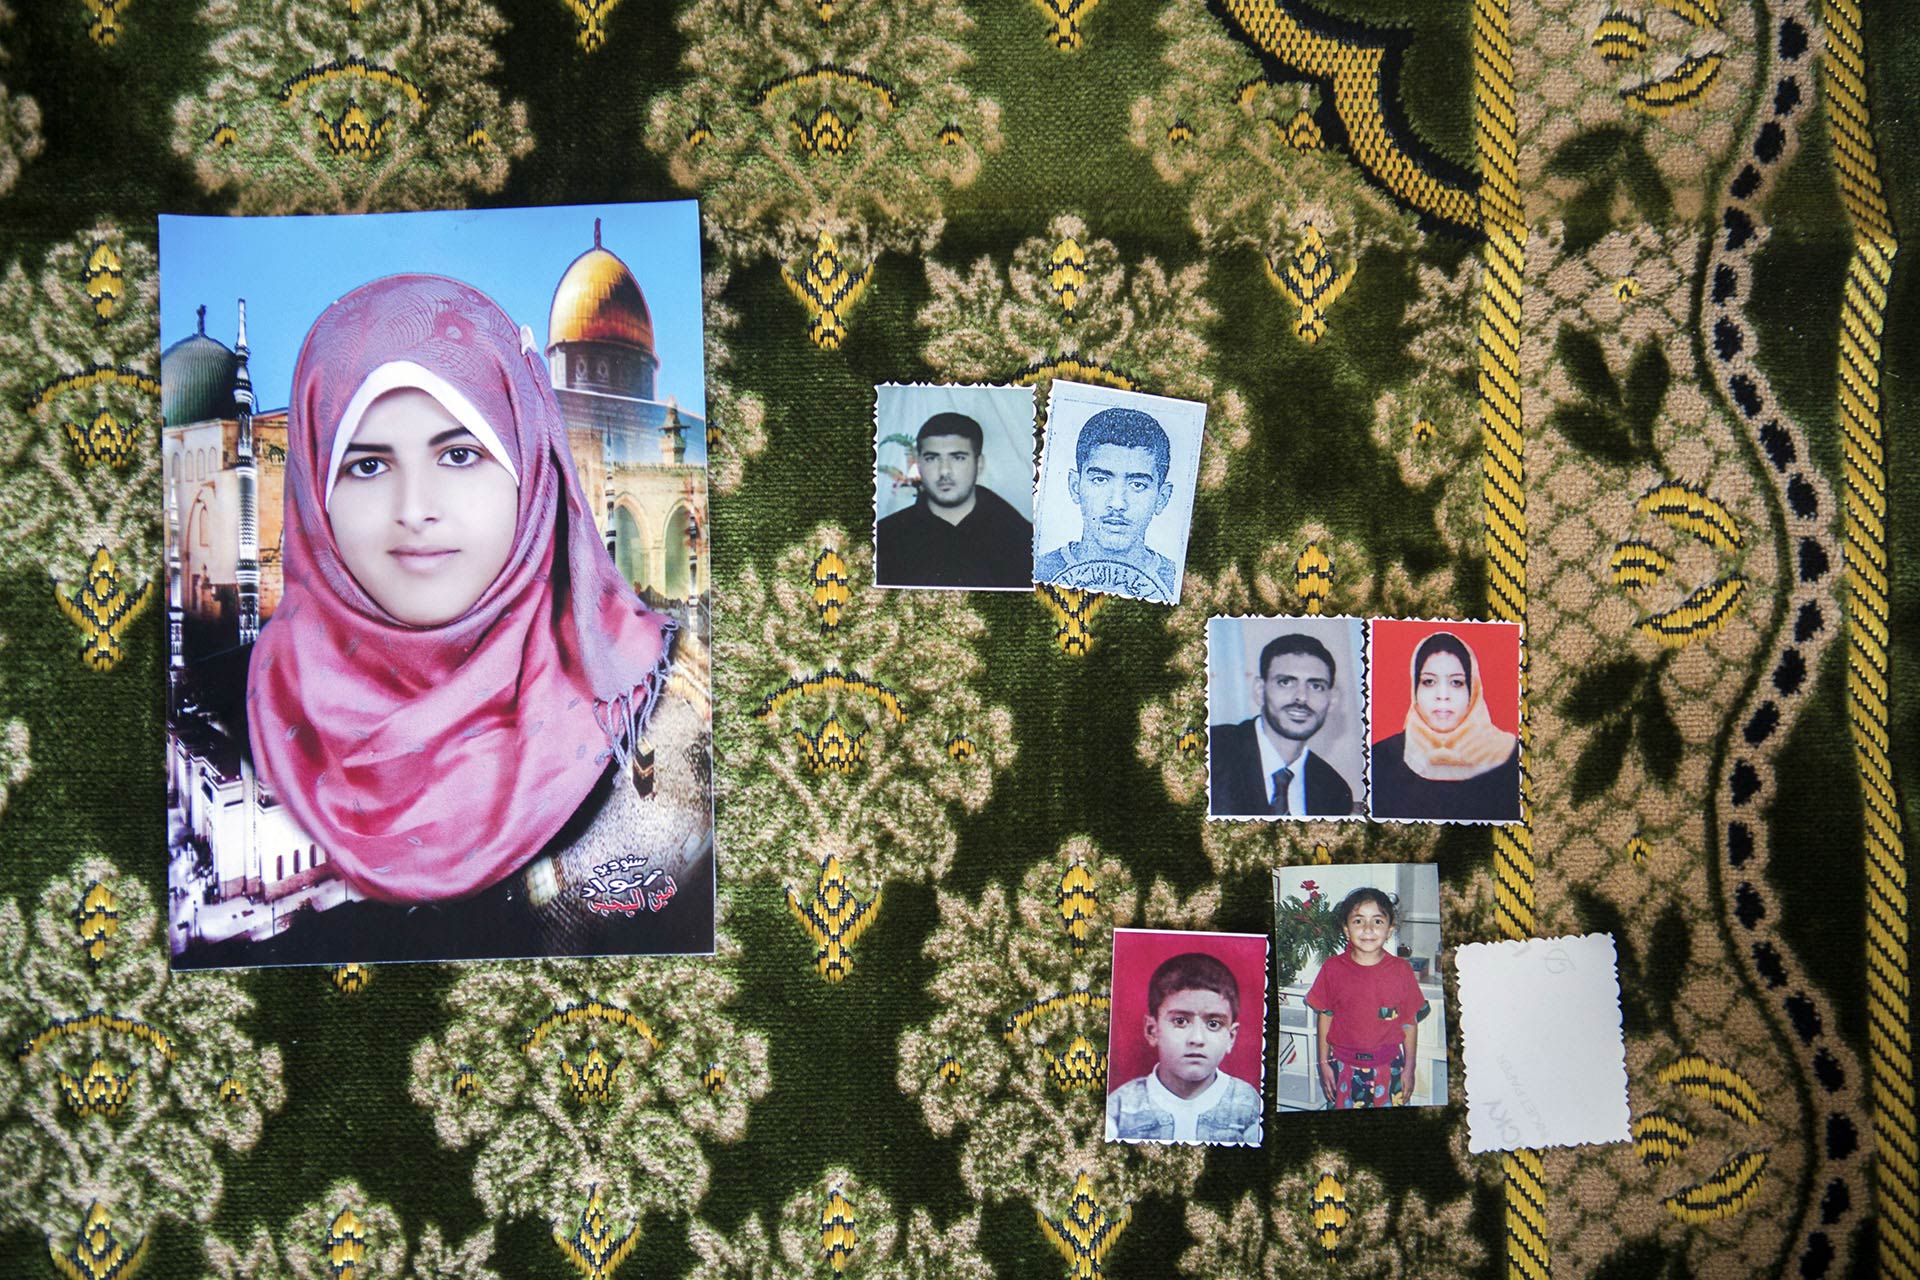 Photos of seven of the eight members of the al-Louh family that were killed, displayed on Iman al-Louh’s prayer rug. Iman was using that rug when she was hit by a piece of concrete that flew into the room through a window.
